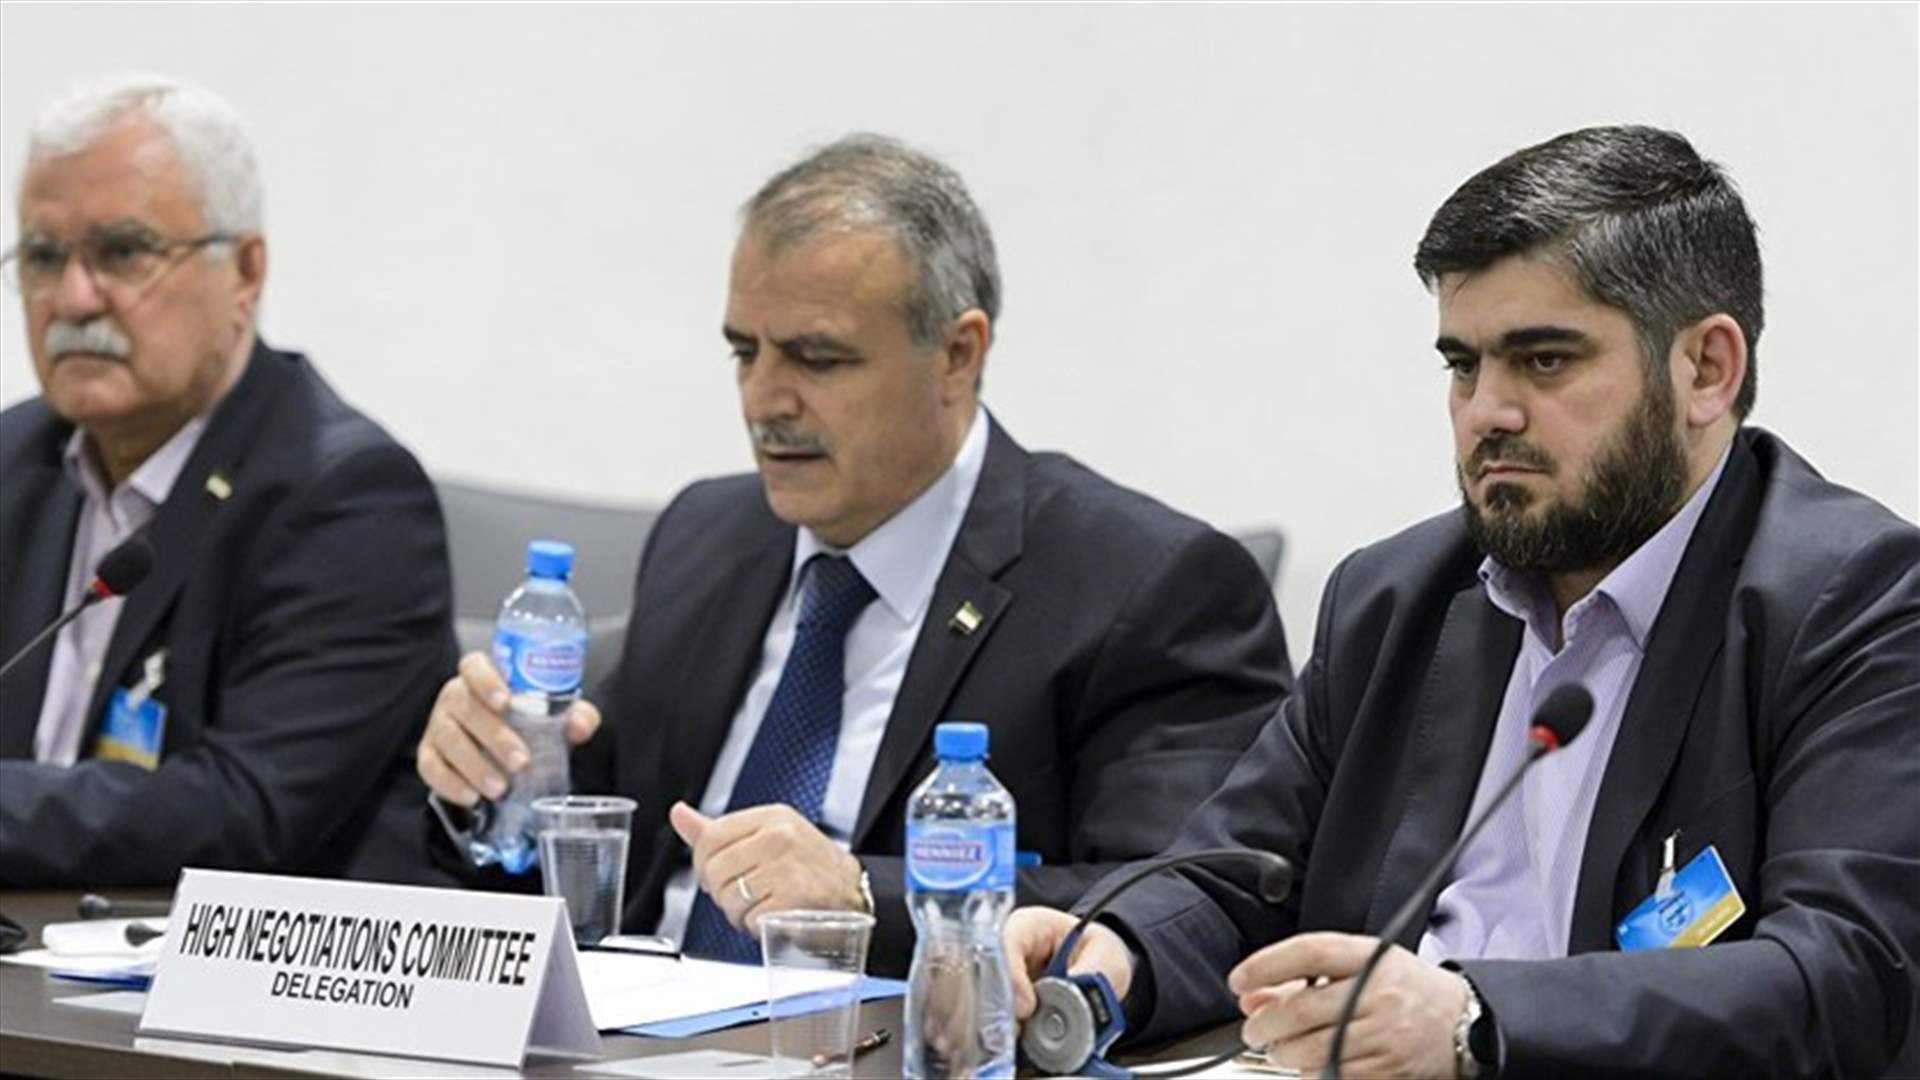 Syrian opposition to decide new negotiating team next week after resignation